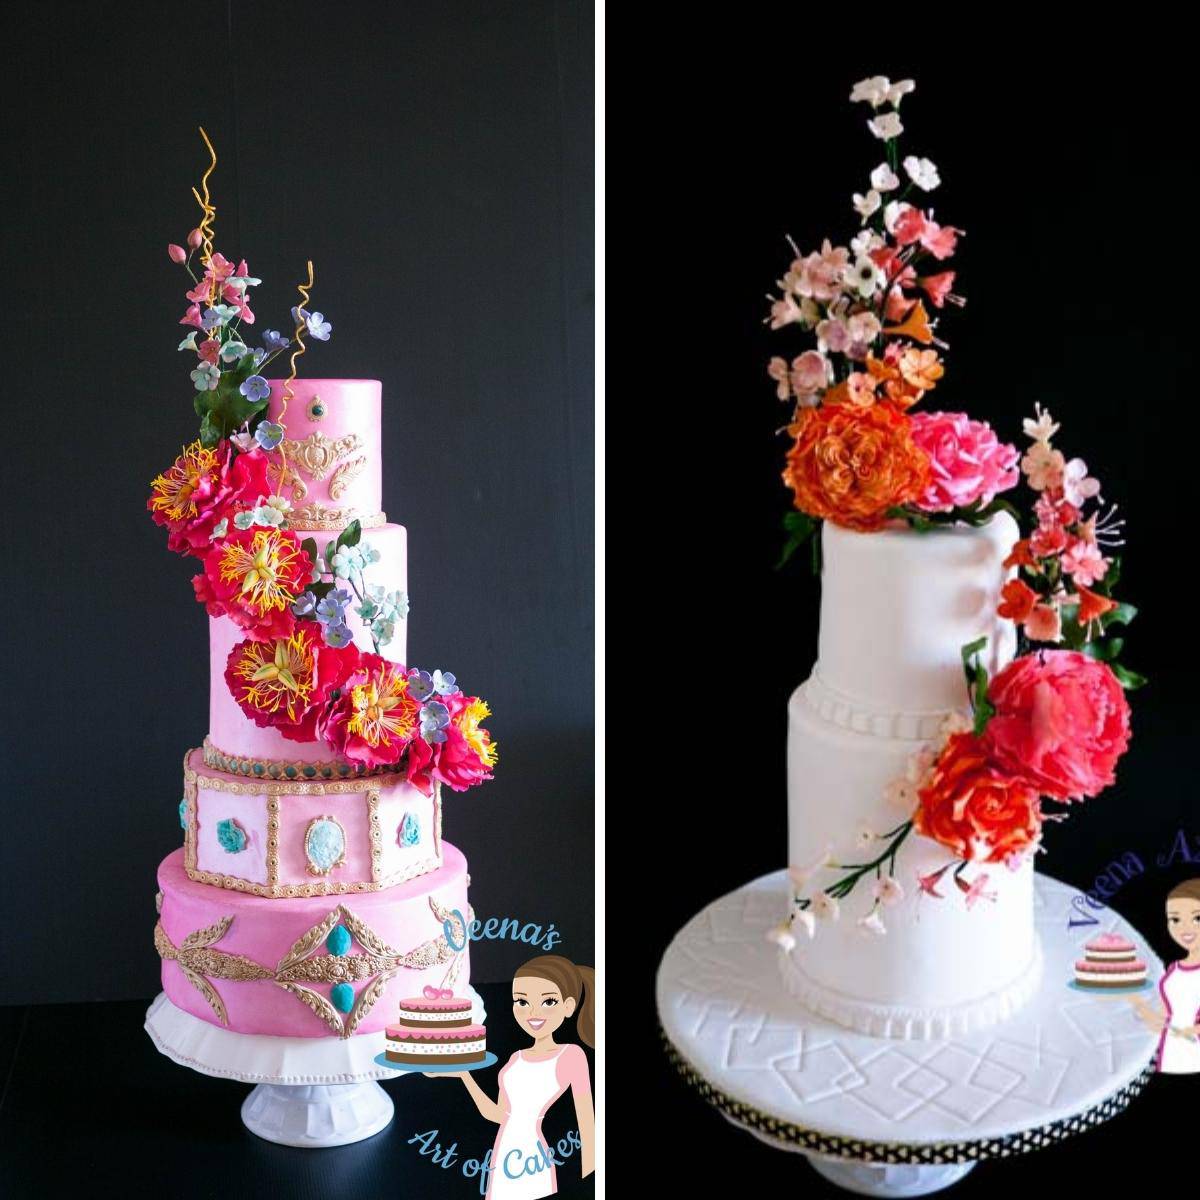 Collage with fondant decorated cakes by Veena Azmanov.